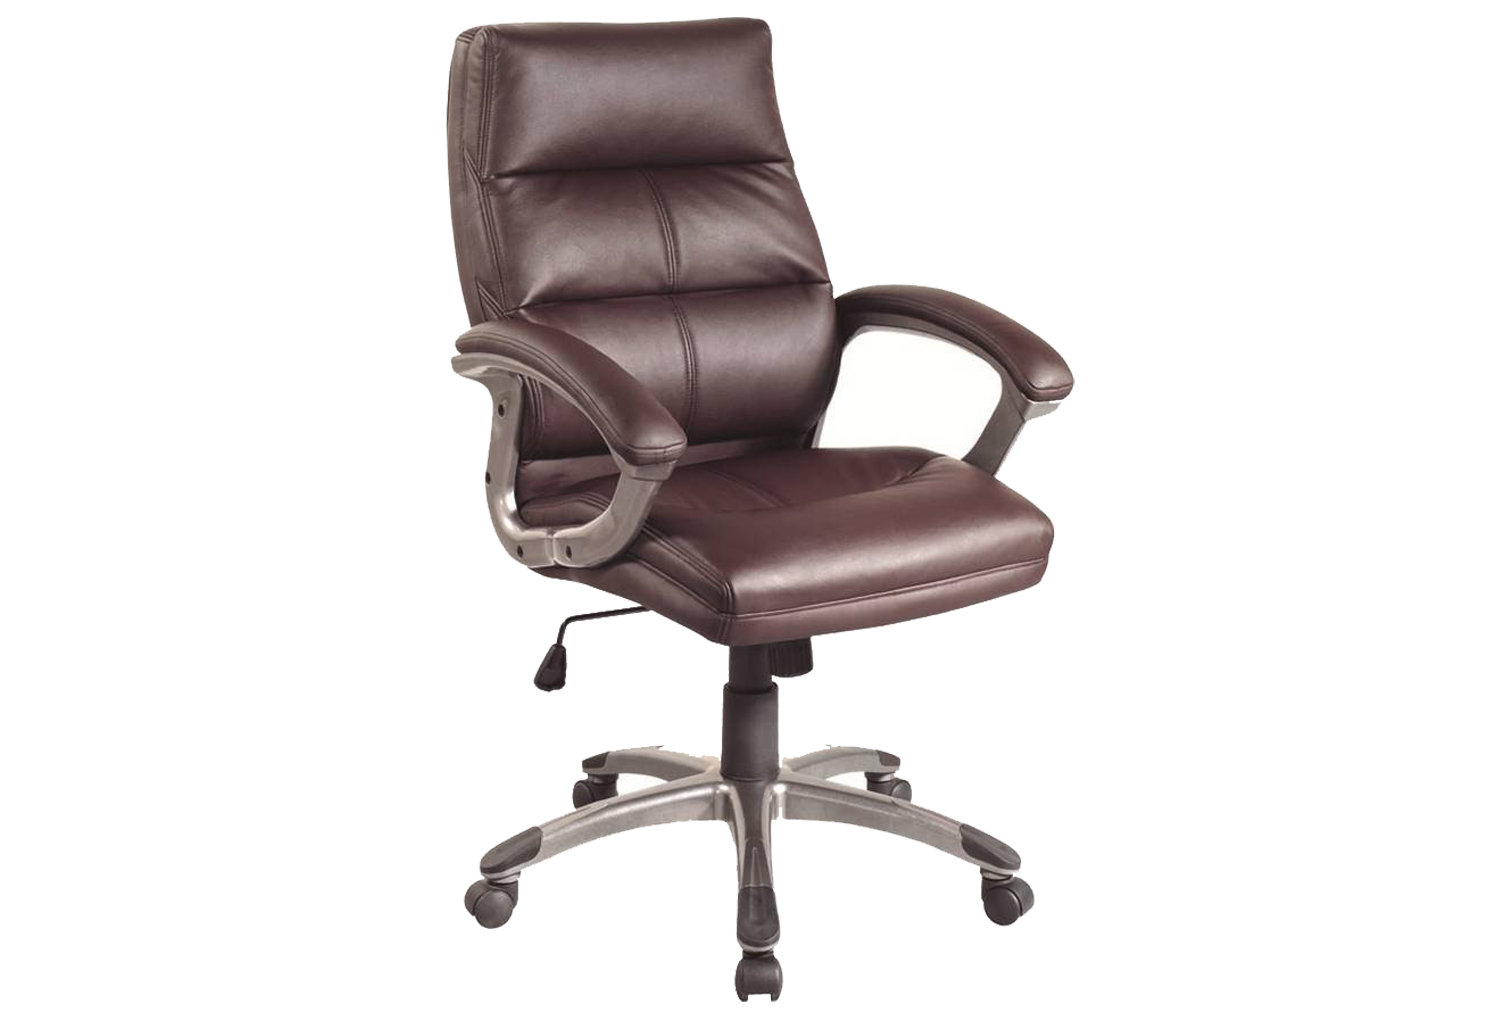 Telford Executive Office Chair (Cherry Brown), Express Delivery